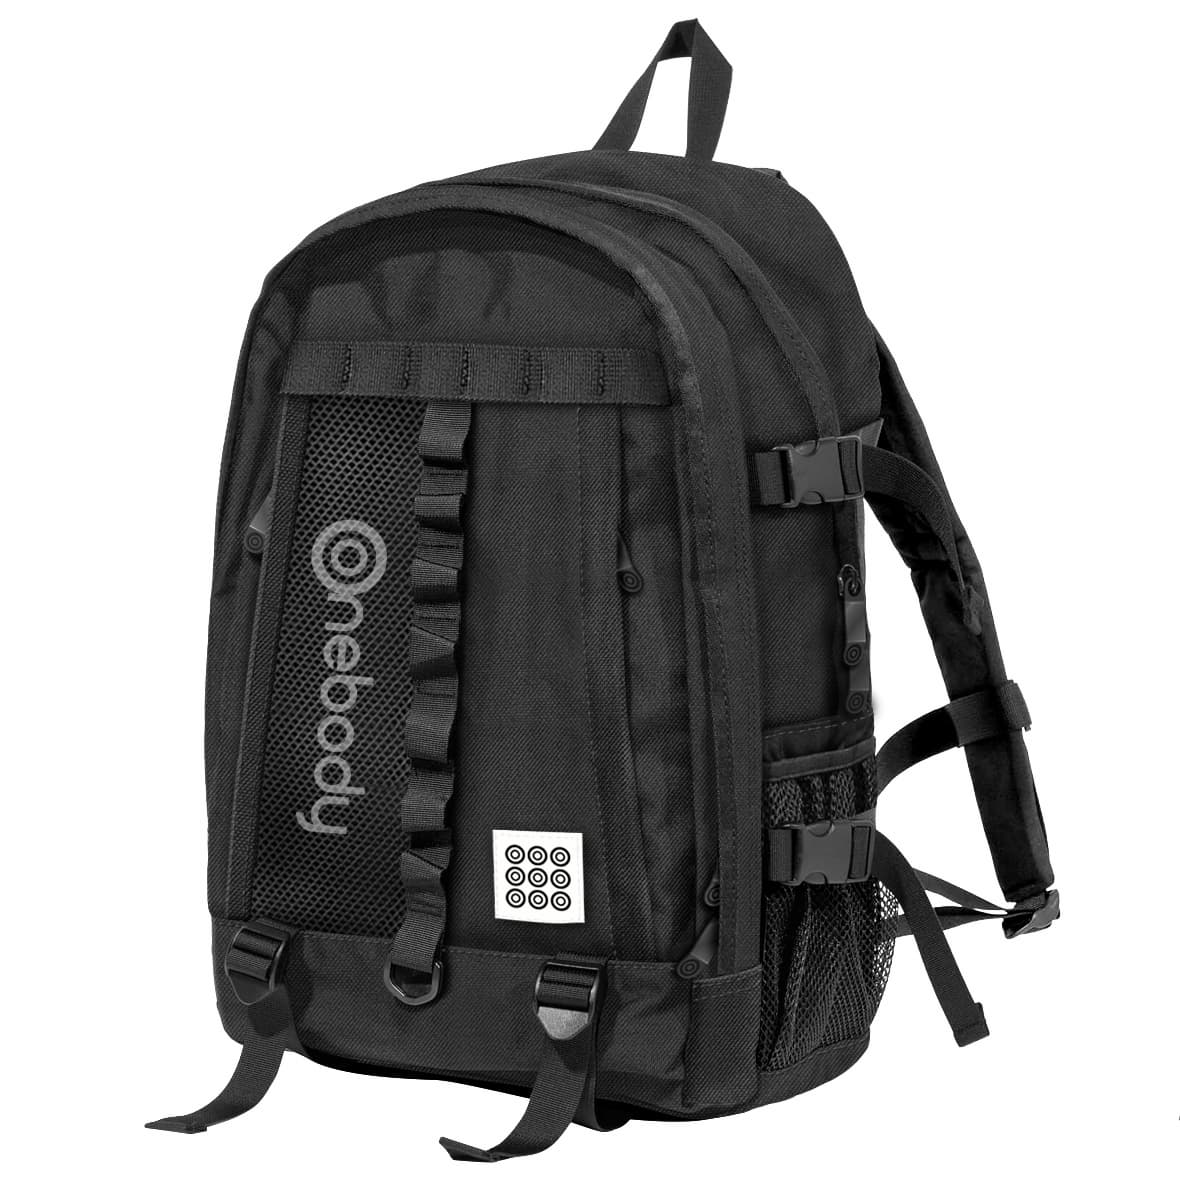 Onebody Laptop Backpack Bag_03 for Travel Business Casual